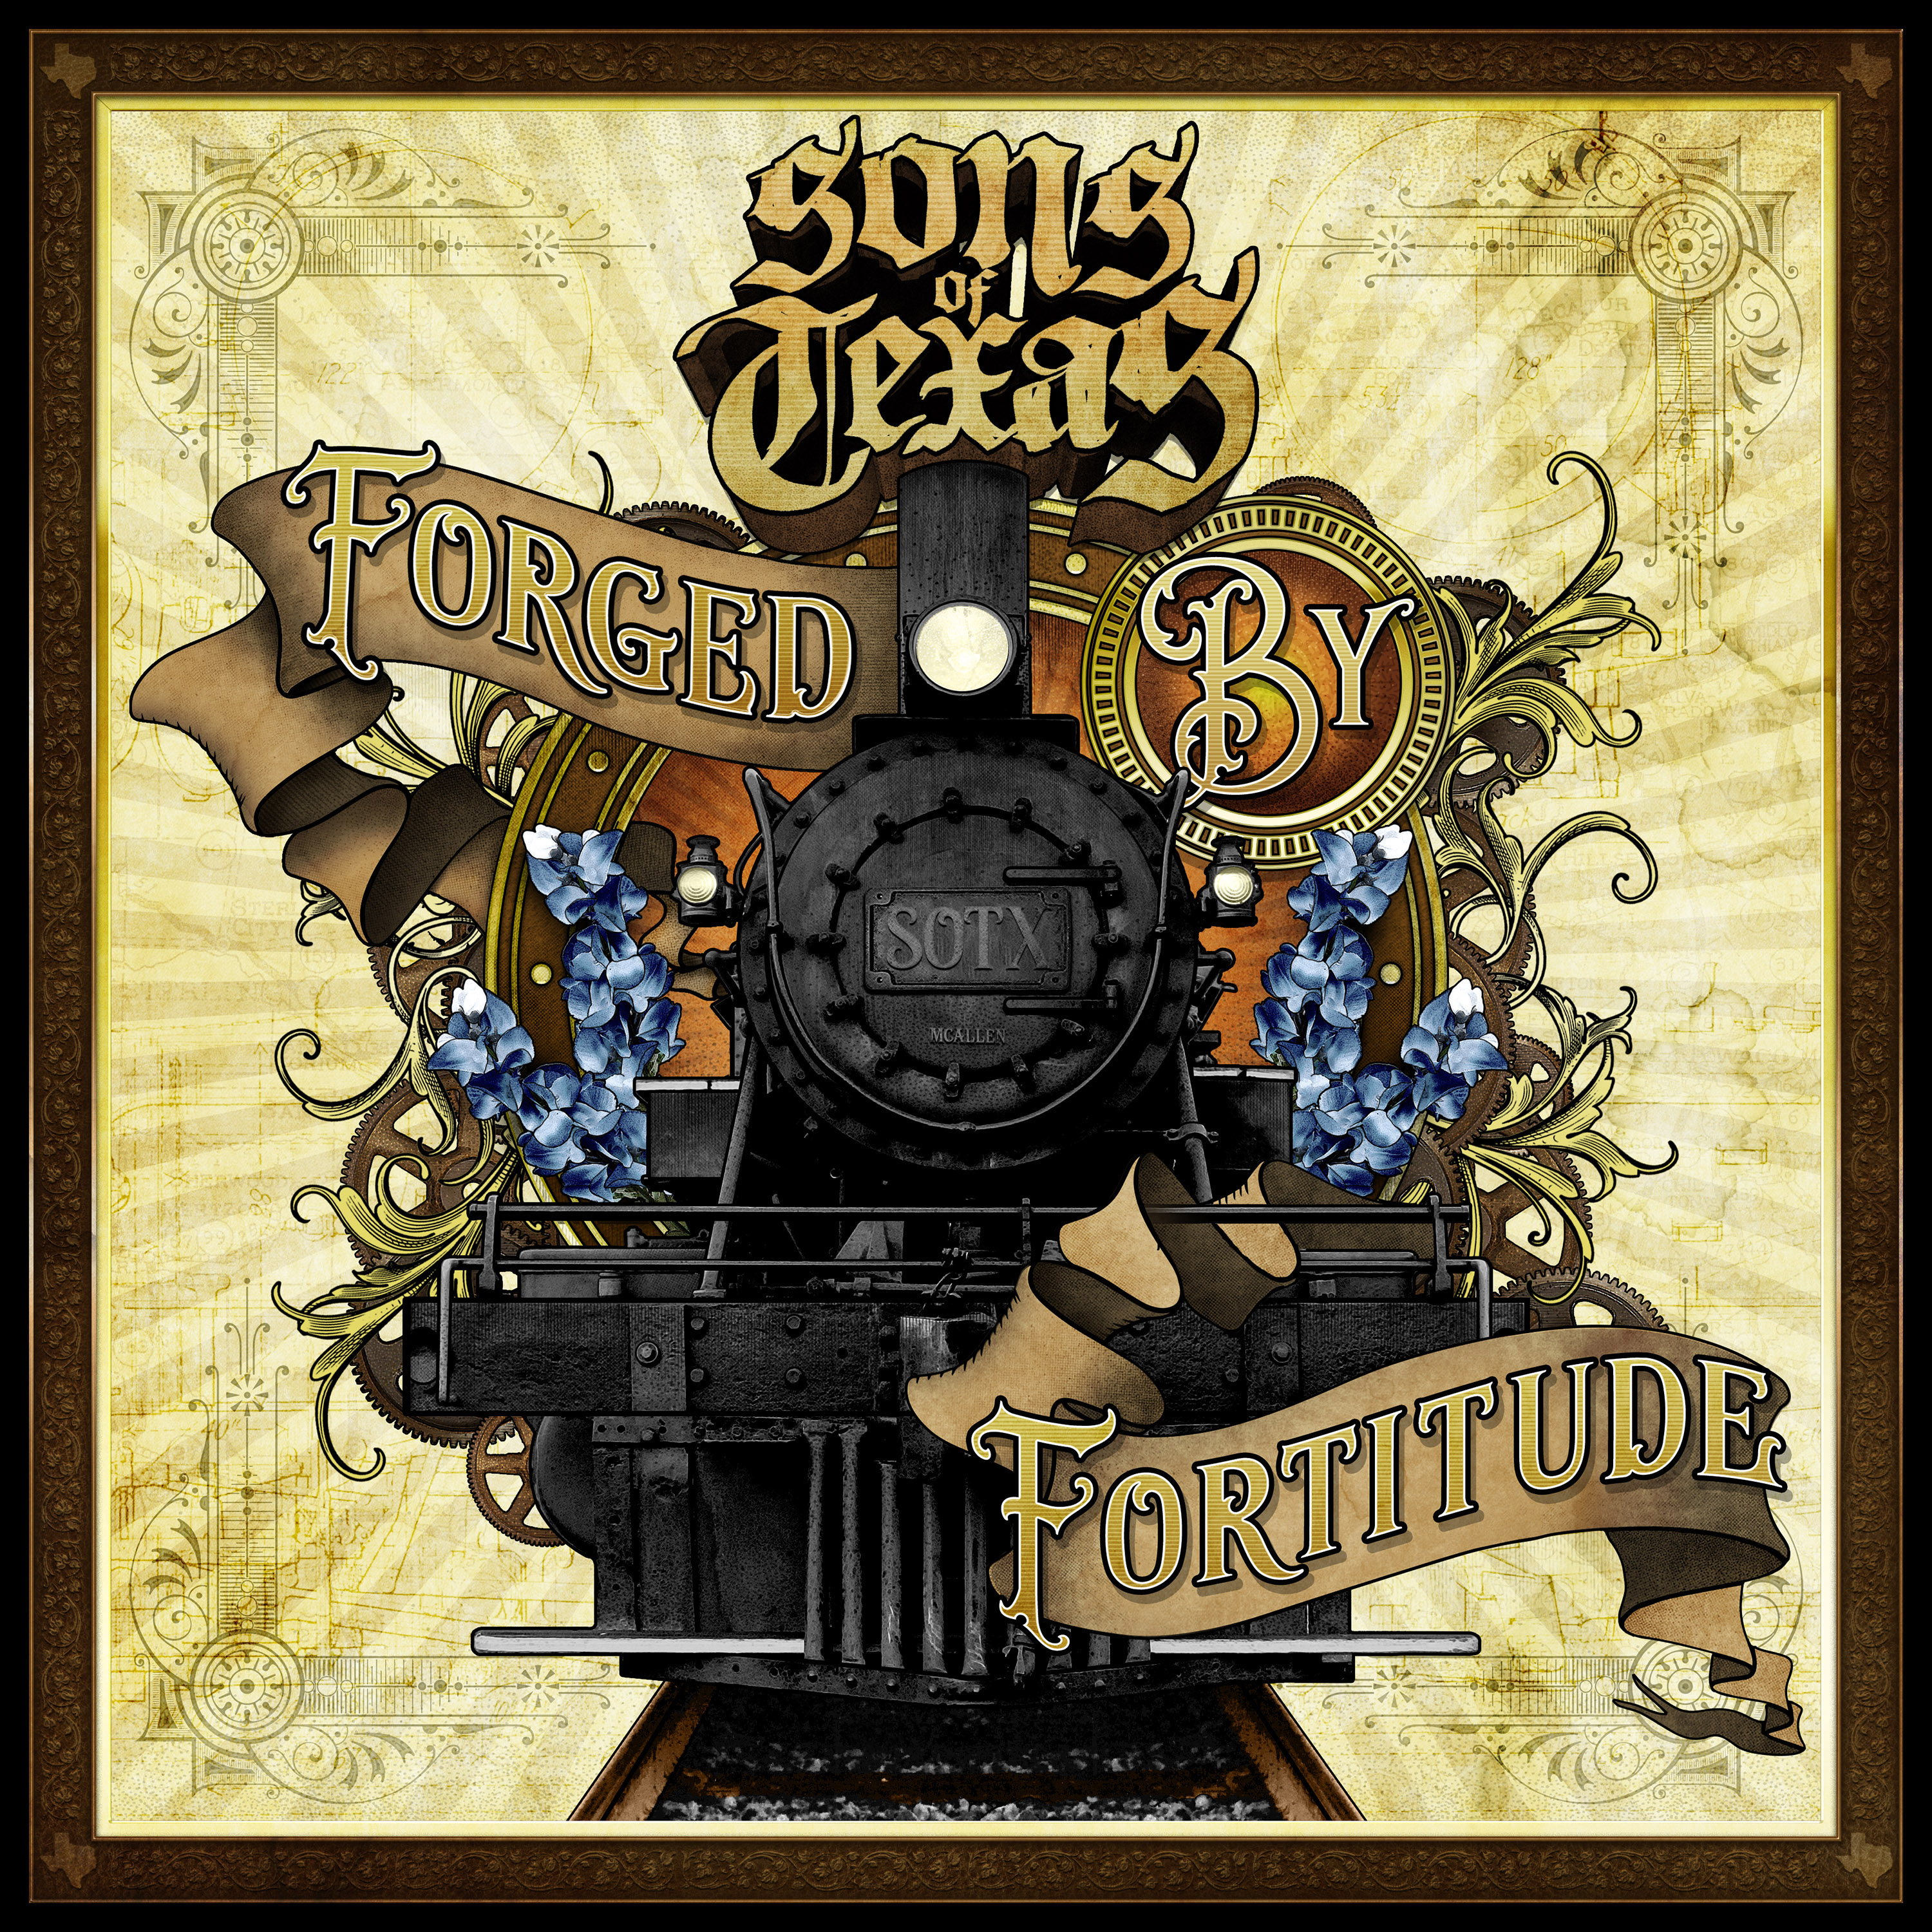 Sons of Texas Forged By Fortitude